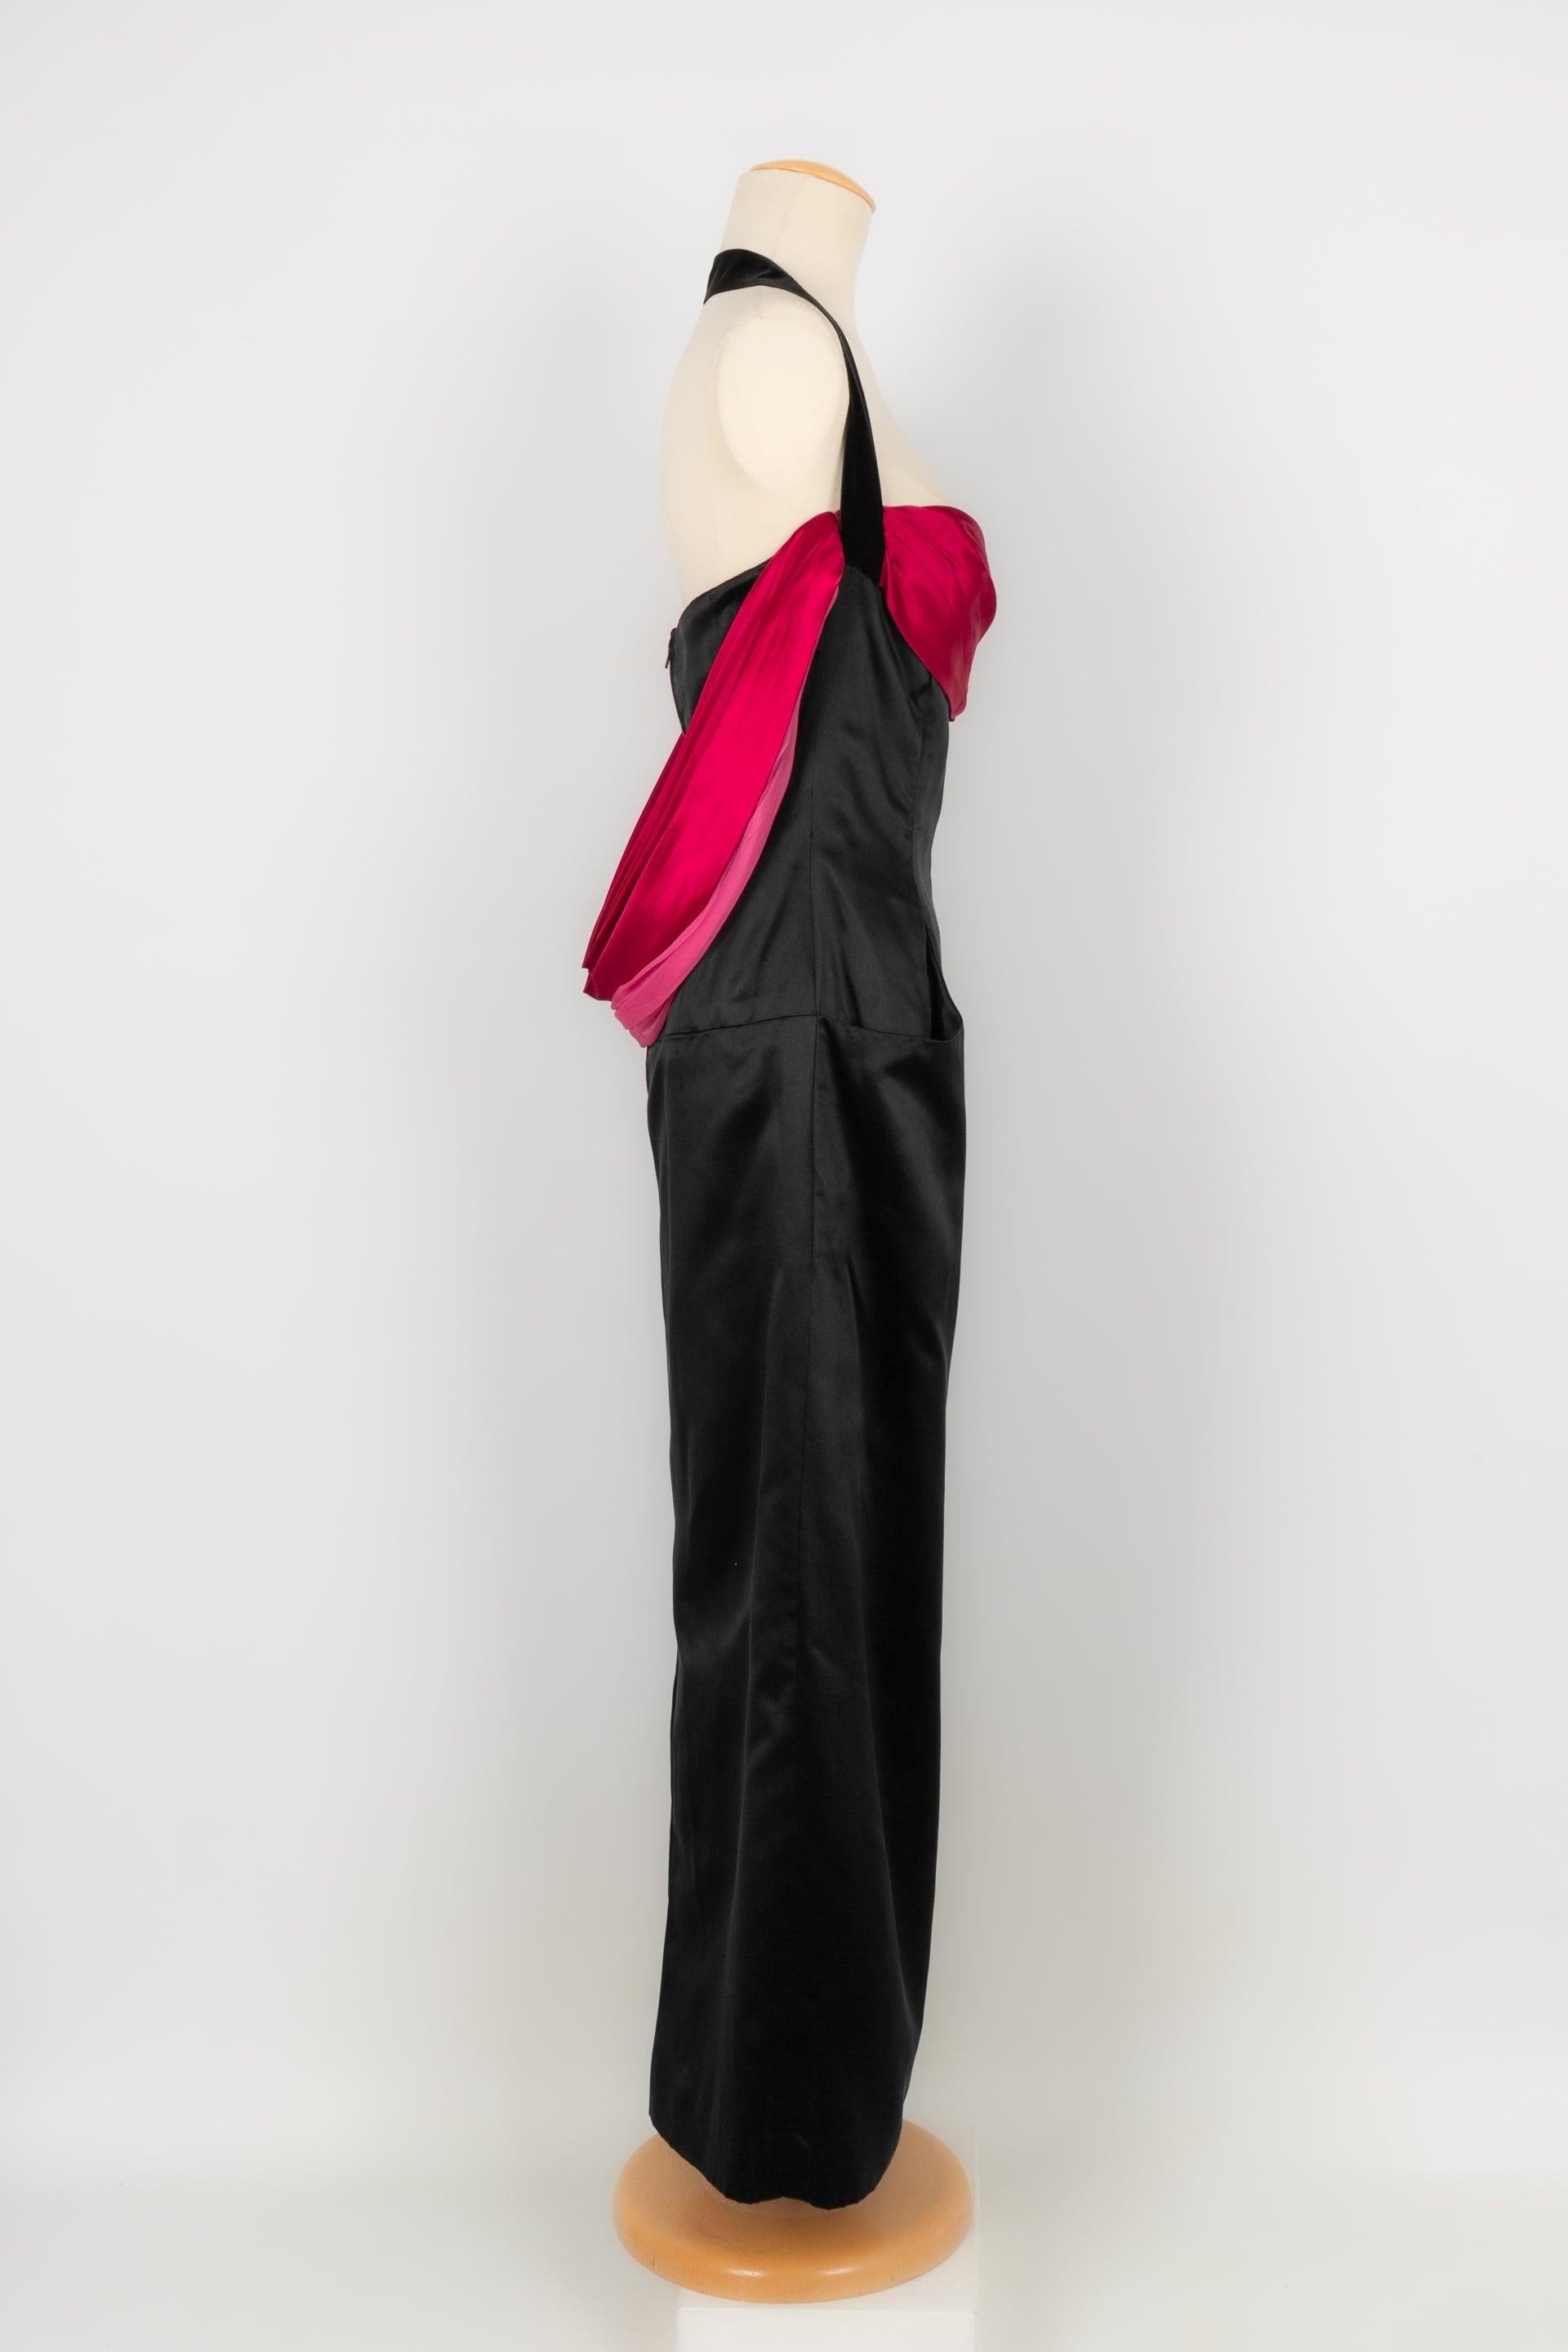 Christian Dior Red and Black Silk Satin Long Dress For Sale 2